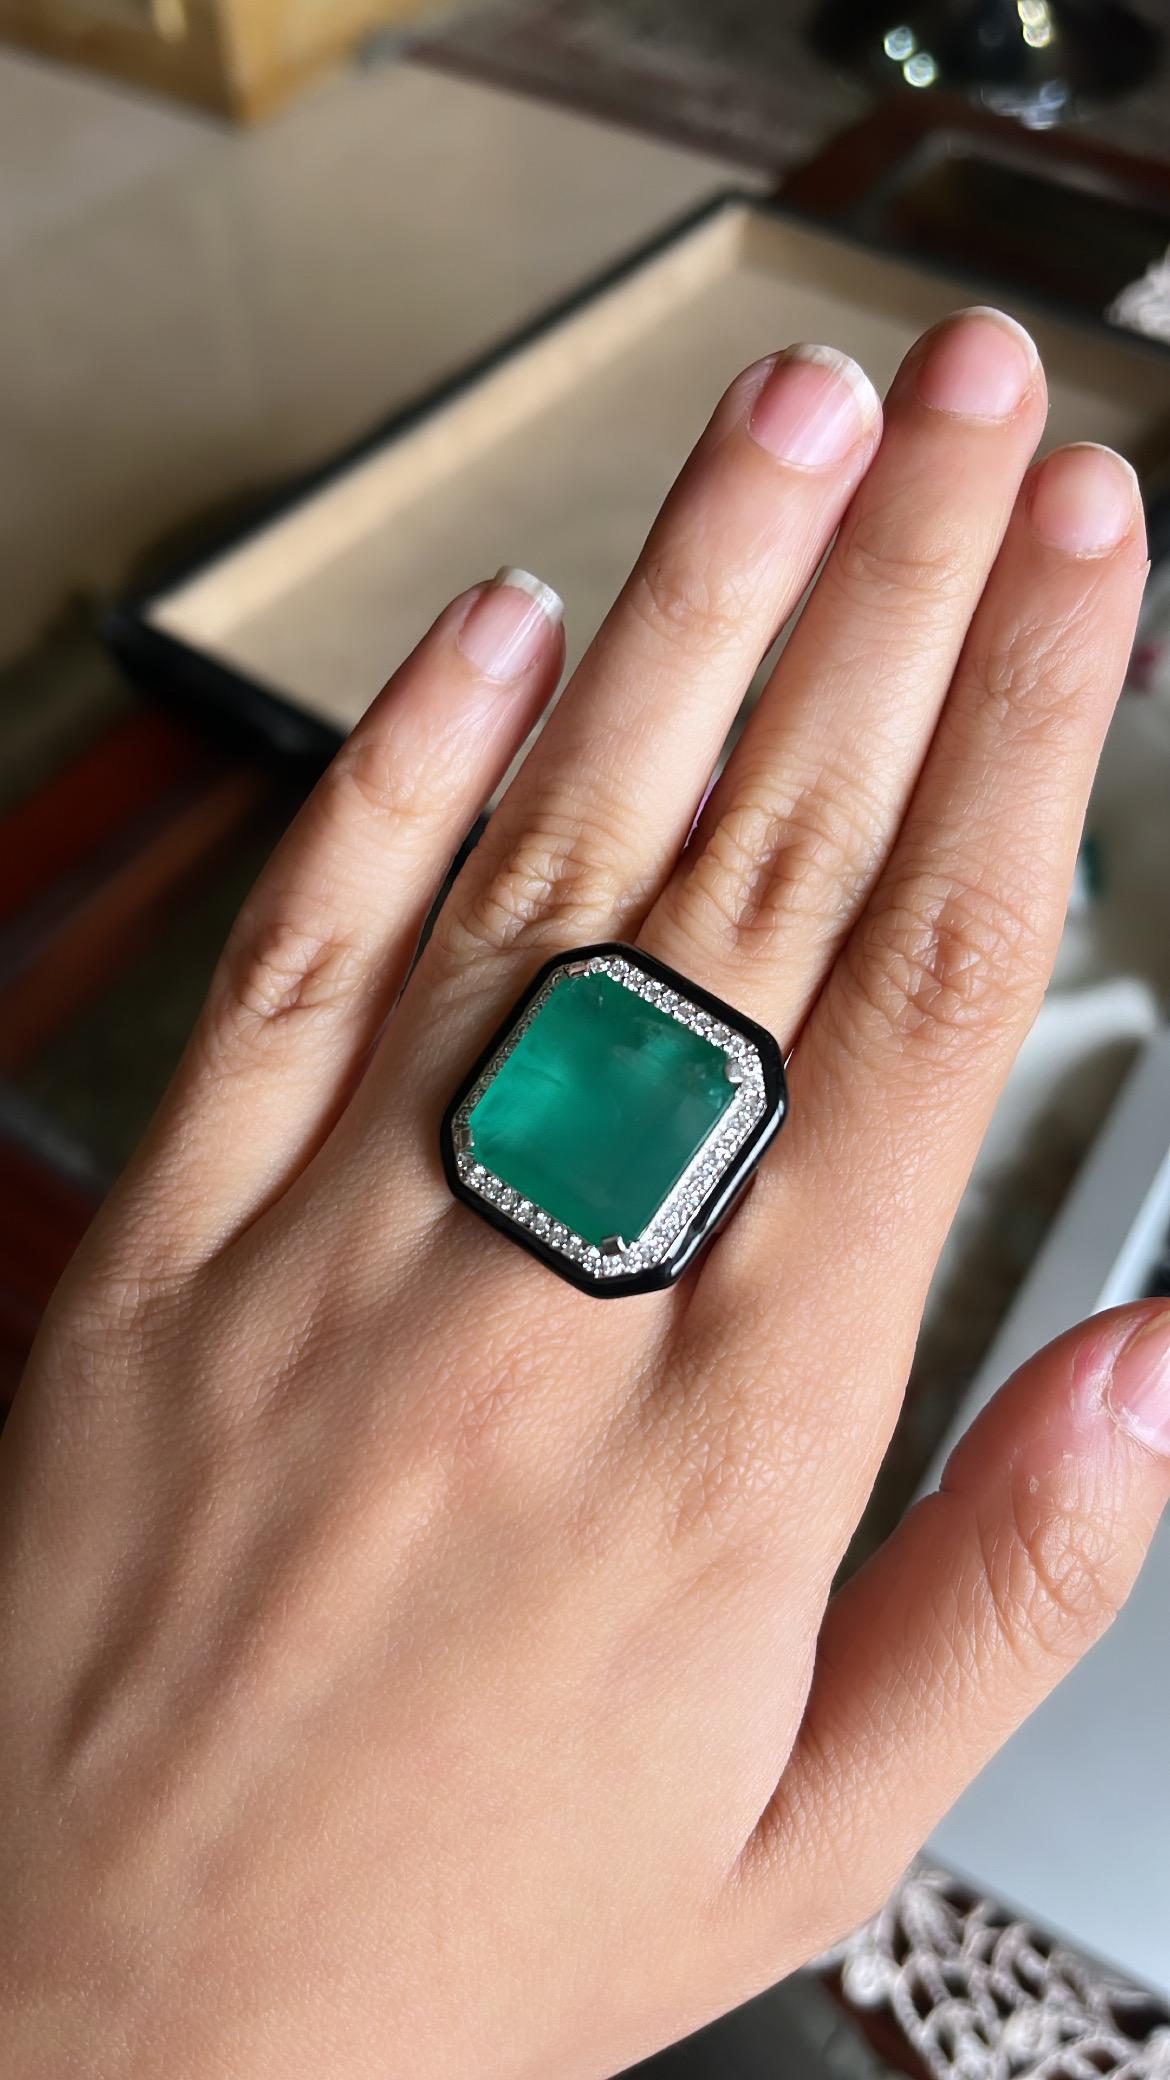 A very stylish and one of a kind, Emerald & Black Enamel Cocktail/ Engagement Ring set in 18K Gold & Diamonds. The weight of the Emerald is 16.72 carats. The Emerald is of Zambian origin and is completely natural, without any treatment. The weight